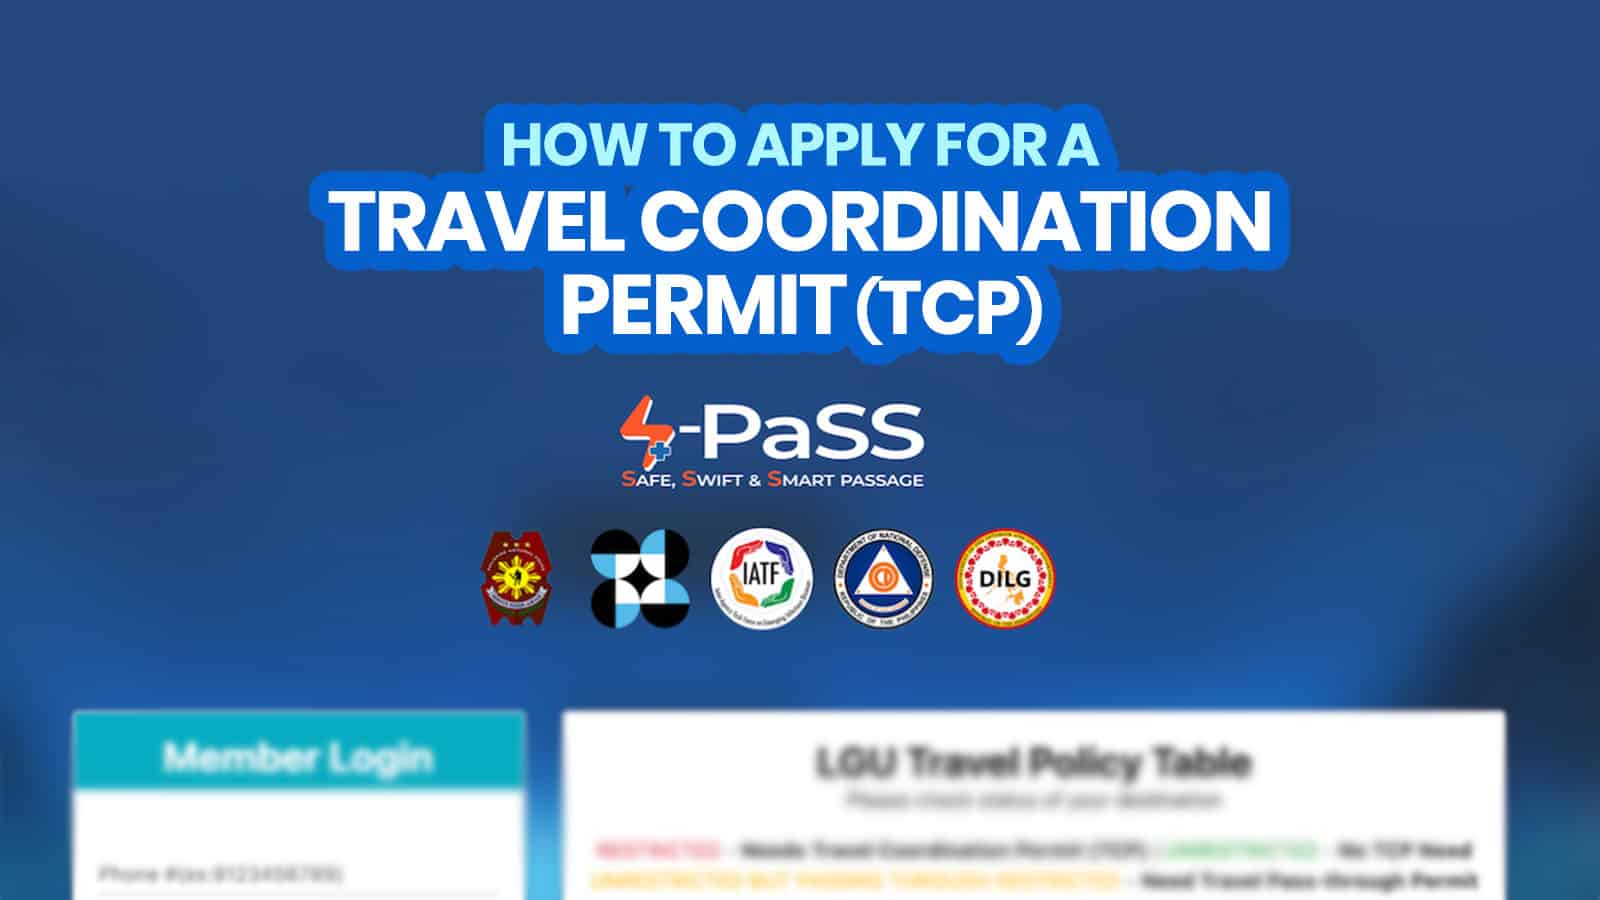 How to Get S-PASS Travel Coordination Permit (TCP)